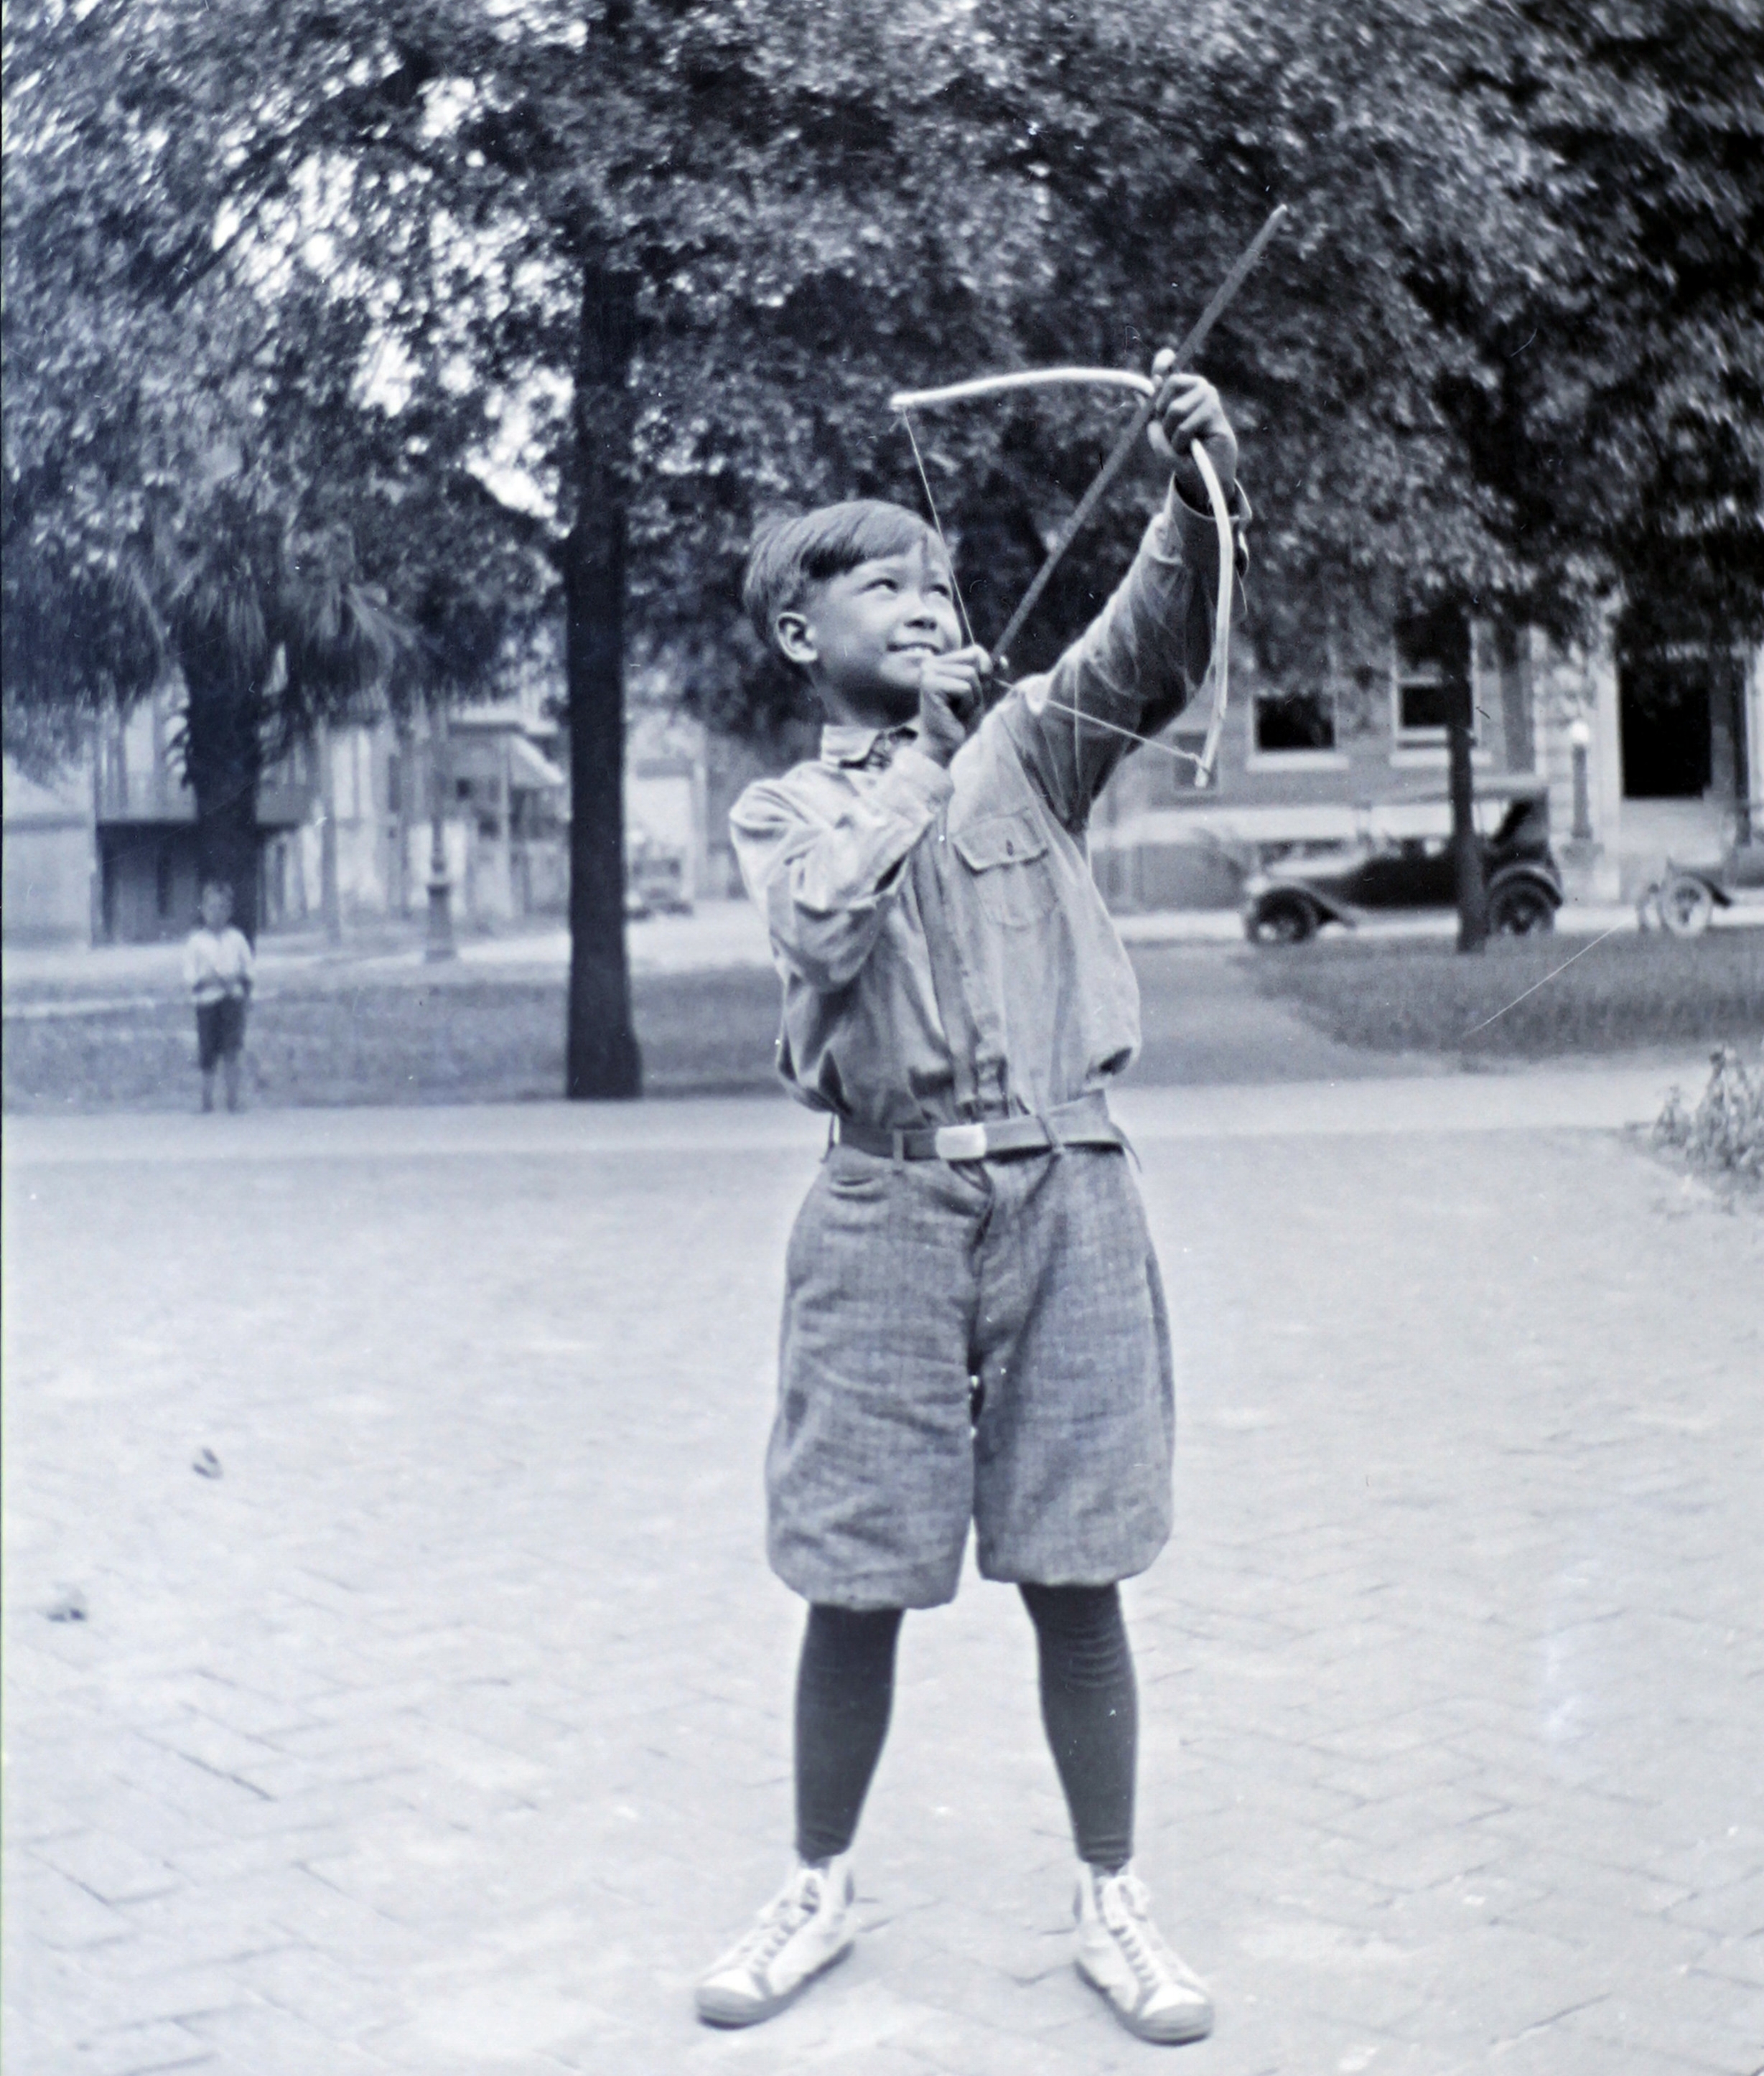 Playing Robin Hood in the park in his "short pants" that he loathed, a pair of Chuck Taylors, and with a handmade bow and arrow, ca. 1920